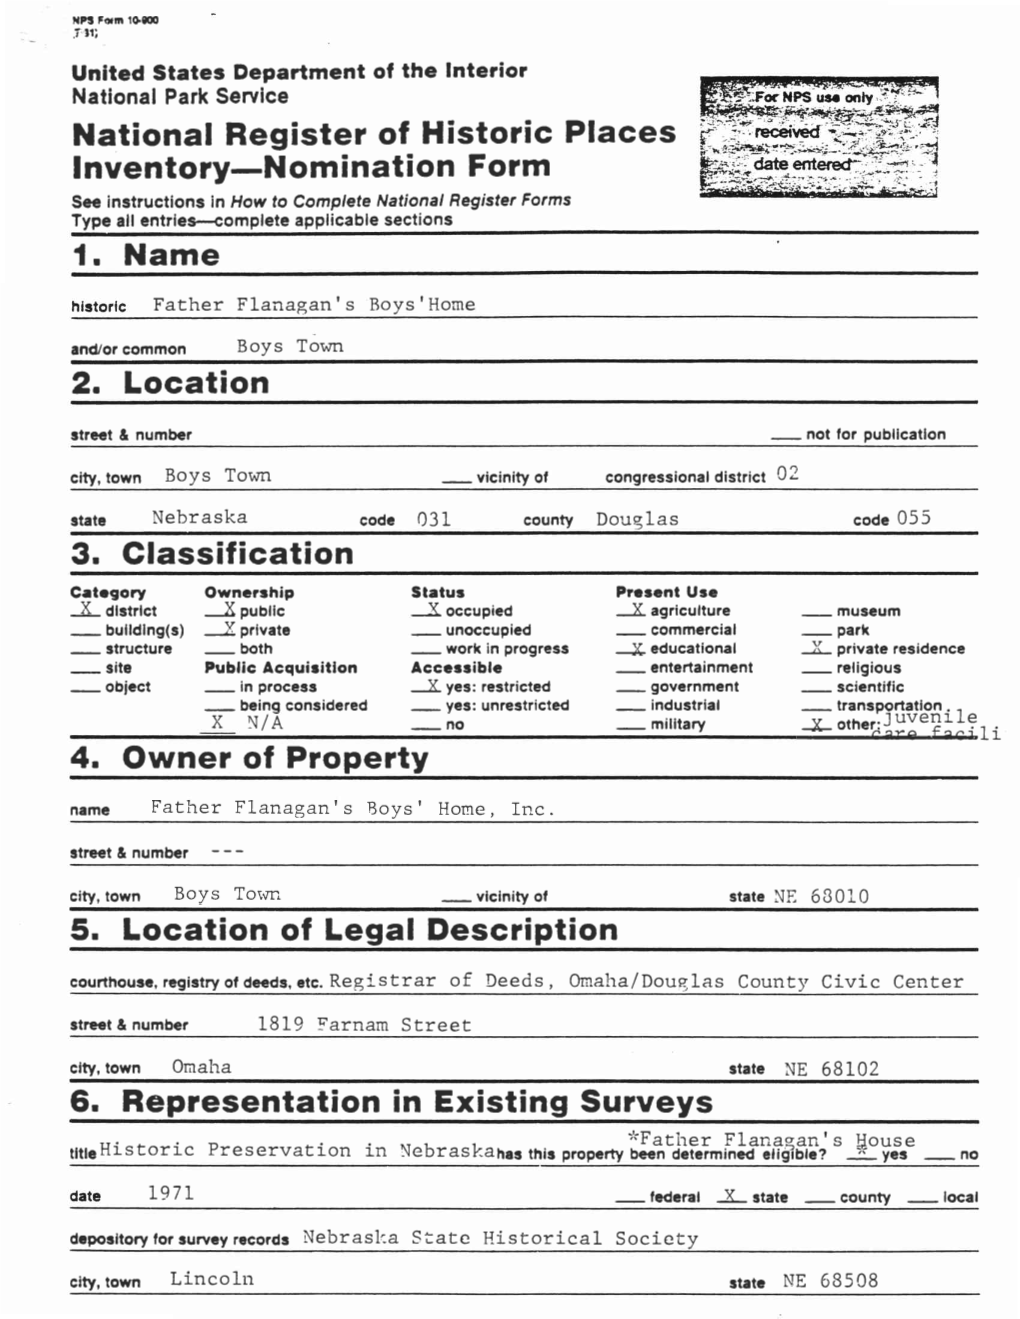 National Register of Historic Places Inventory-Nomination Form 2. Location 3. Classification 4. Owner of Property 5. Location Of